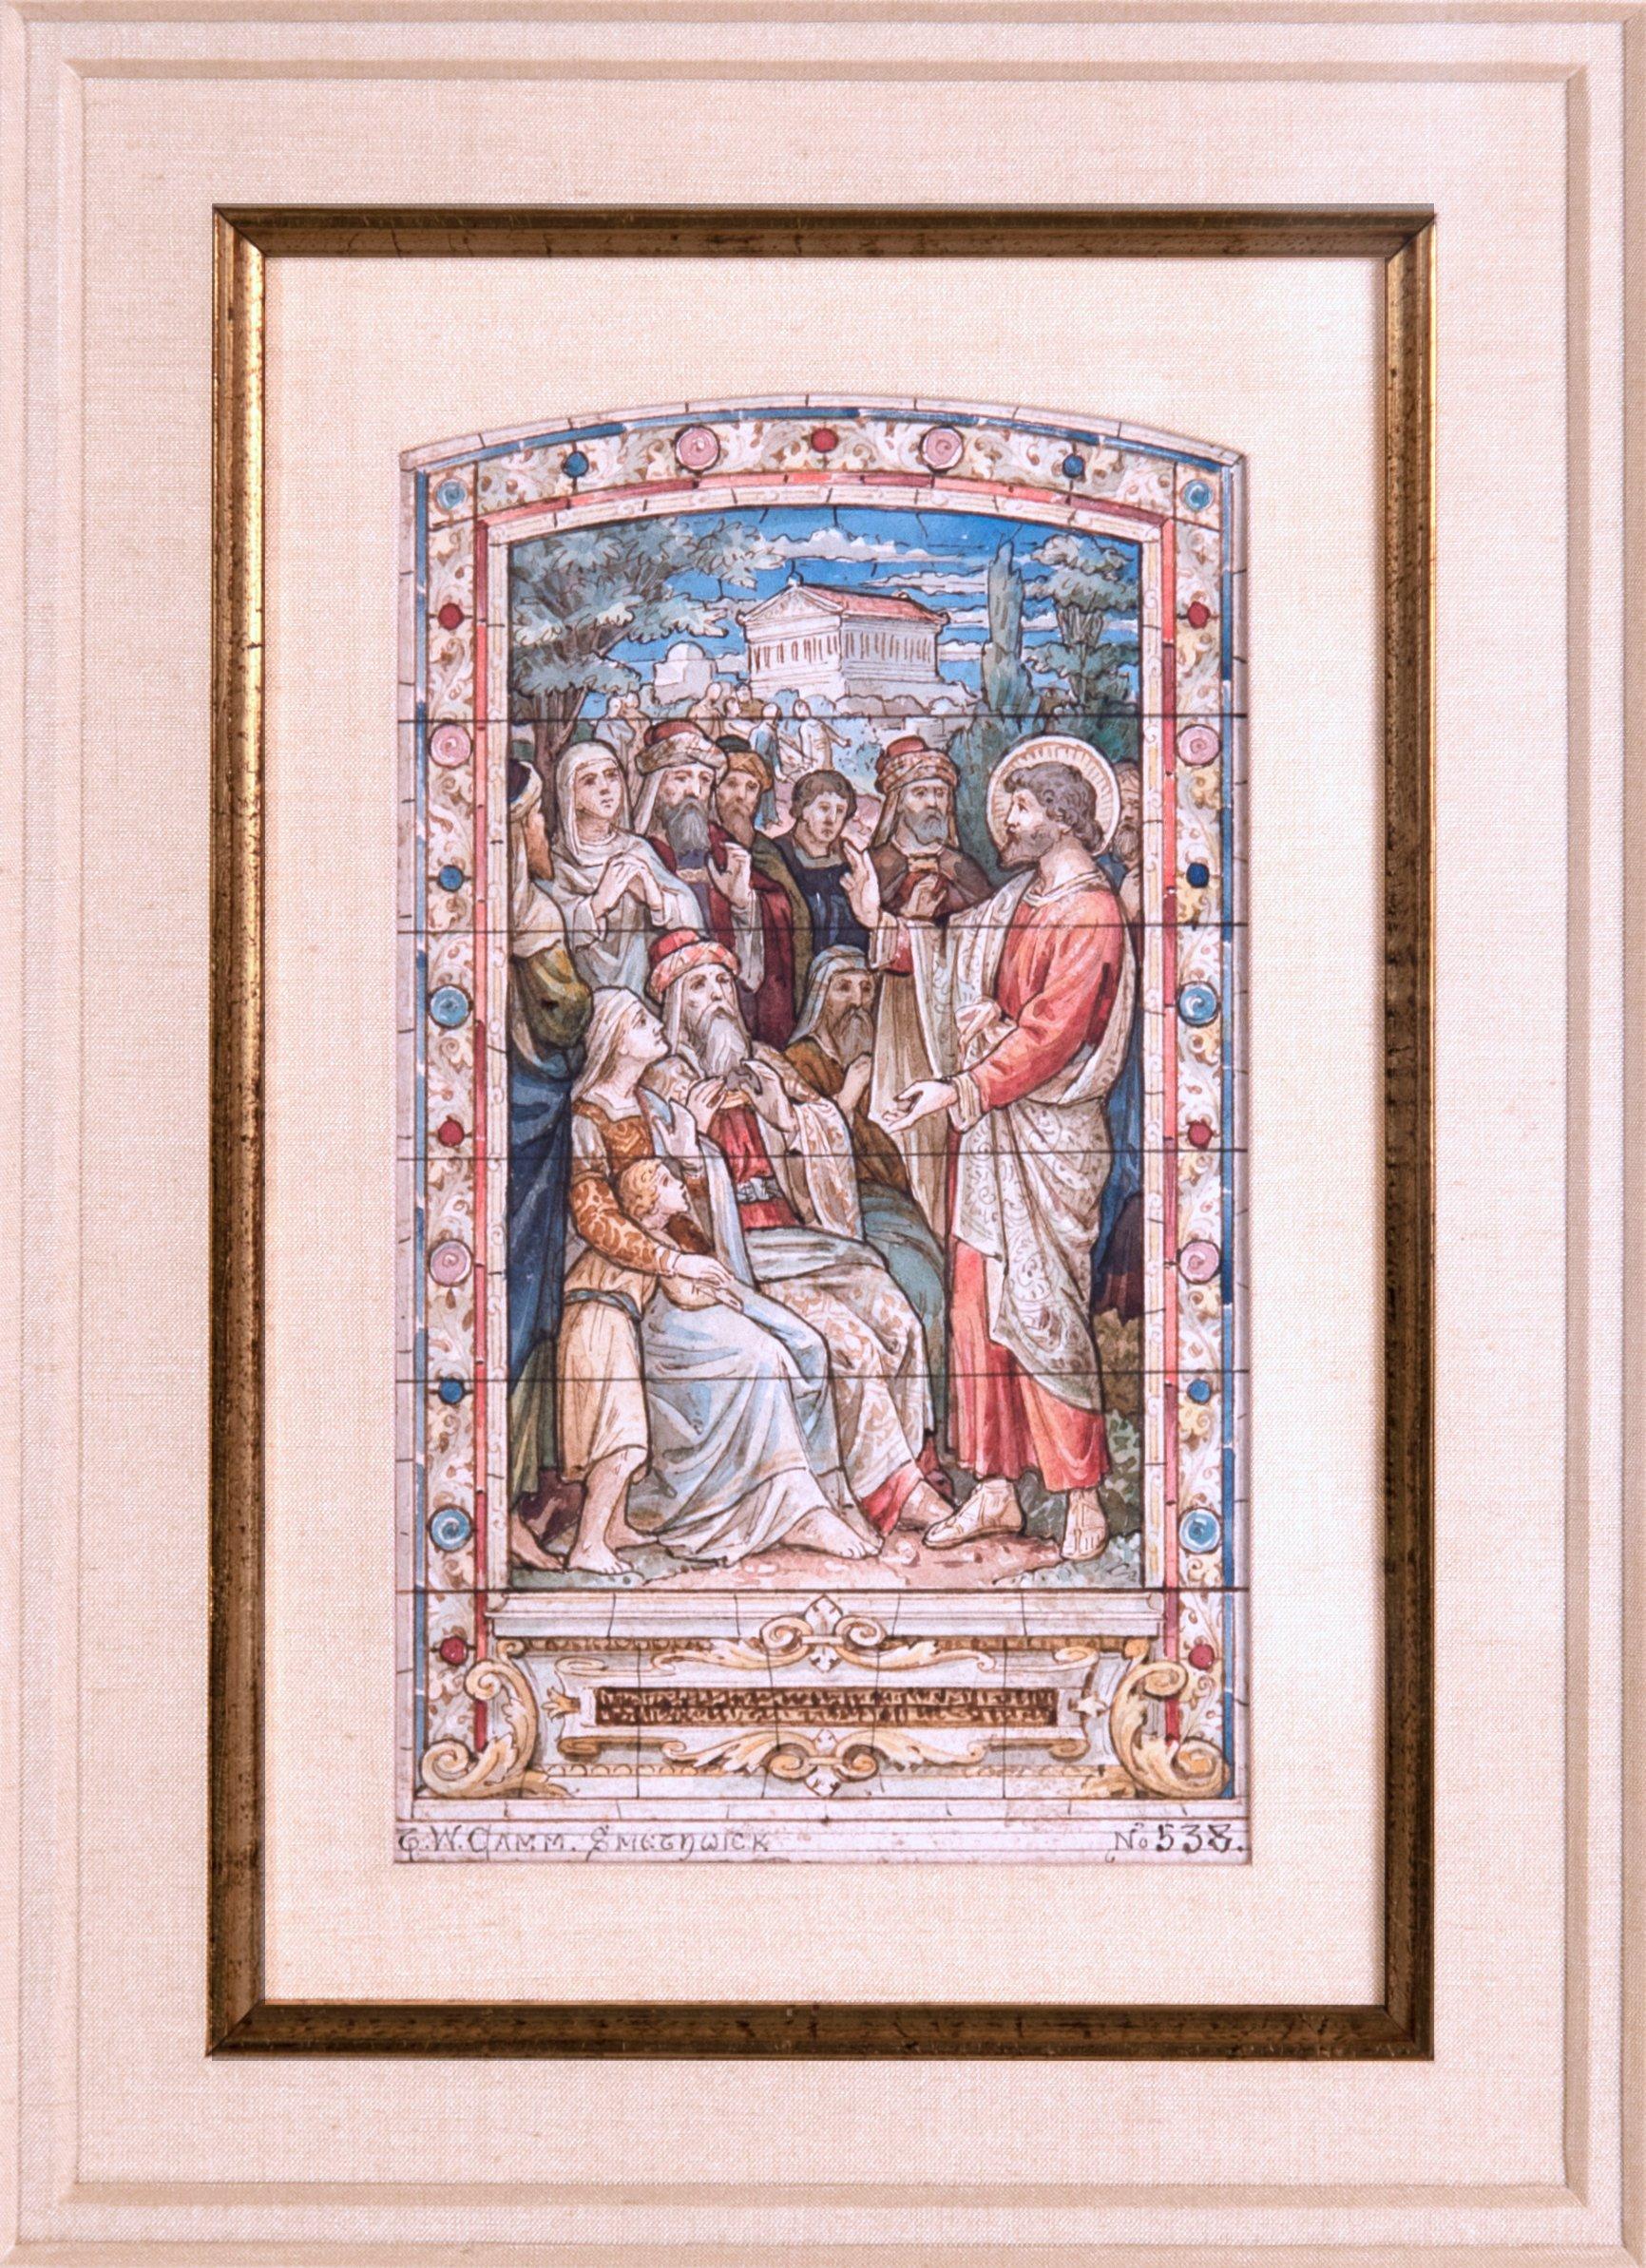 An original watercolor created by the artist Thomas William Camm (British, 1839-1912) for a Church commission. Camm is considered one of Great Britain's most talented designers of stained glass. Before production on a monumental work of stained